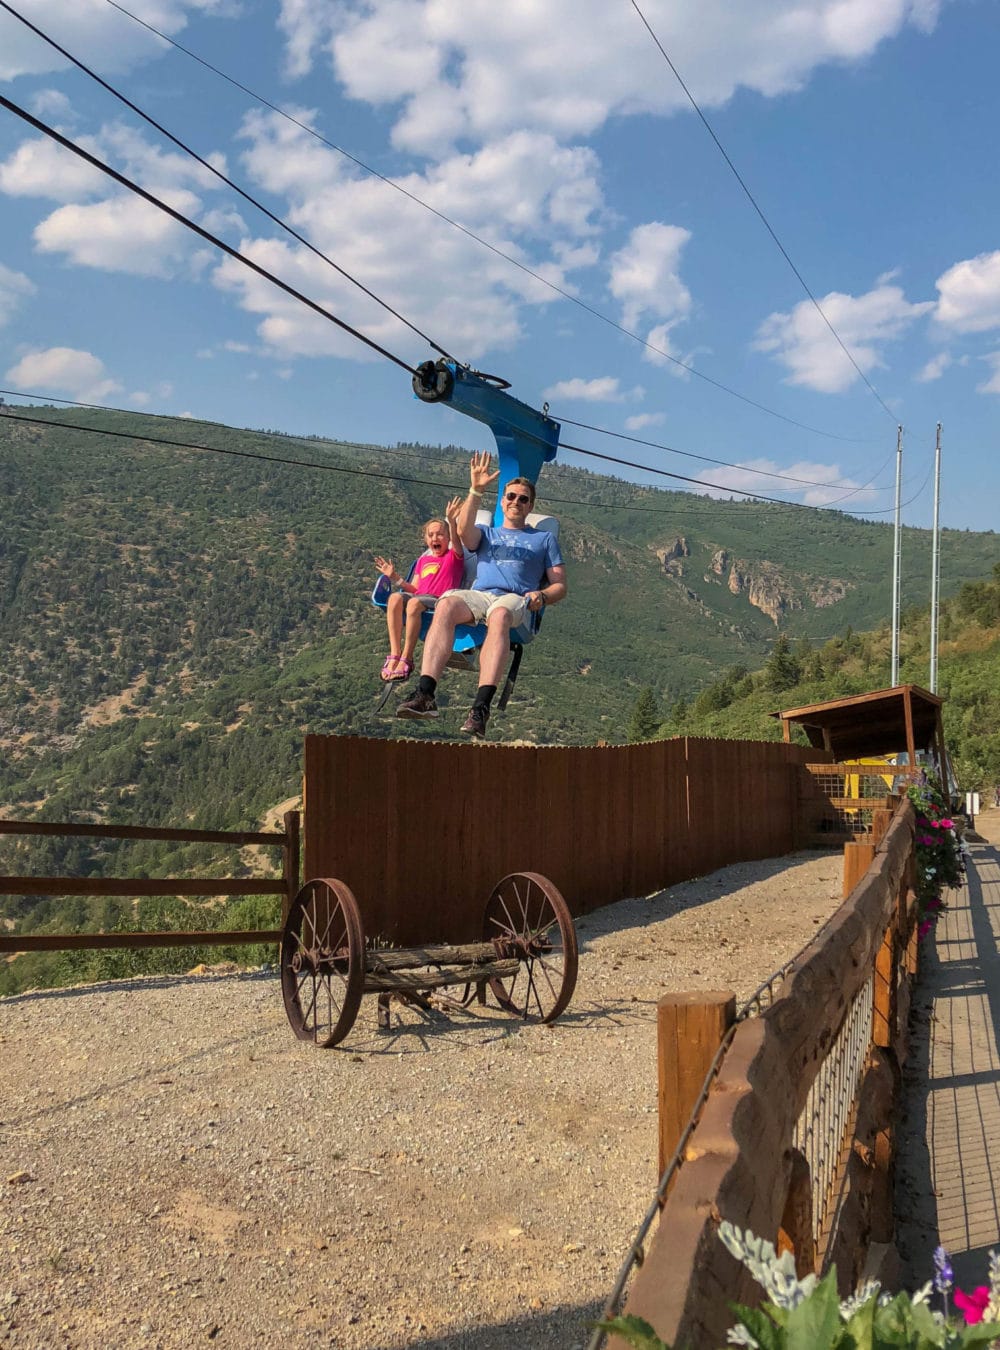 Riding the Soaring Eagle Zip Ride